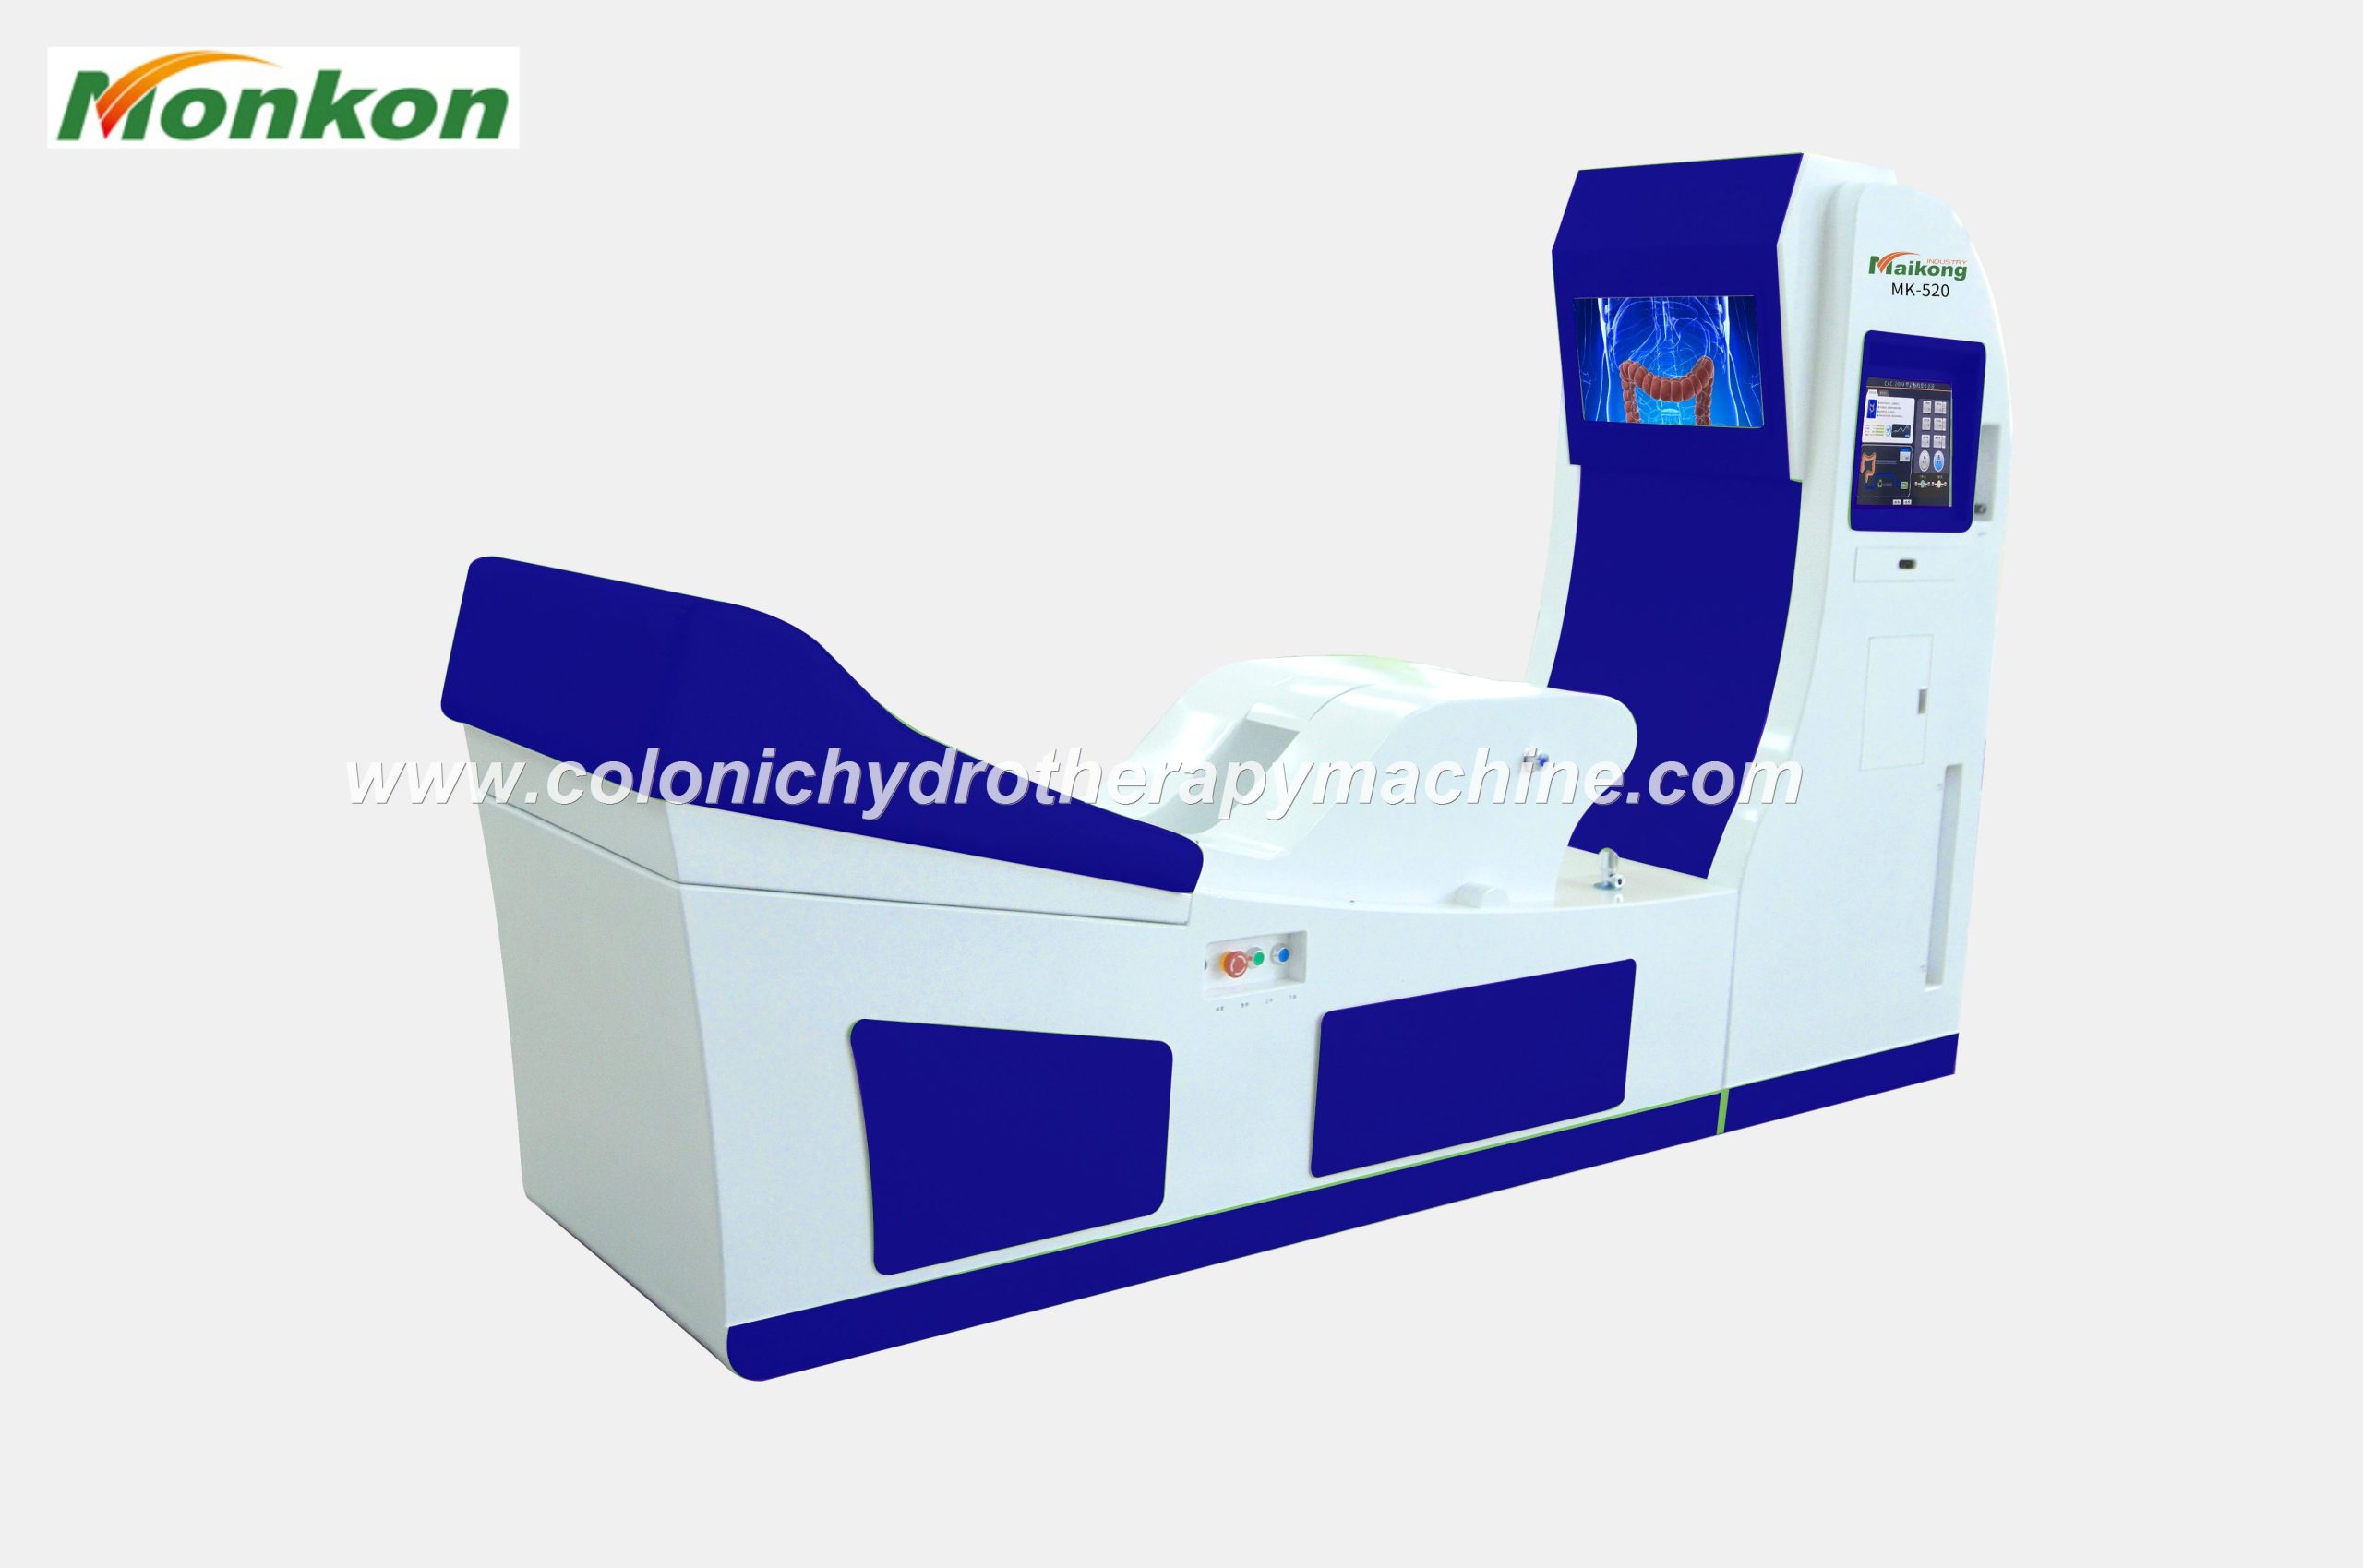 MAIKONG Colon Hydrotherapy Machines